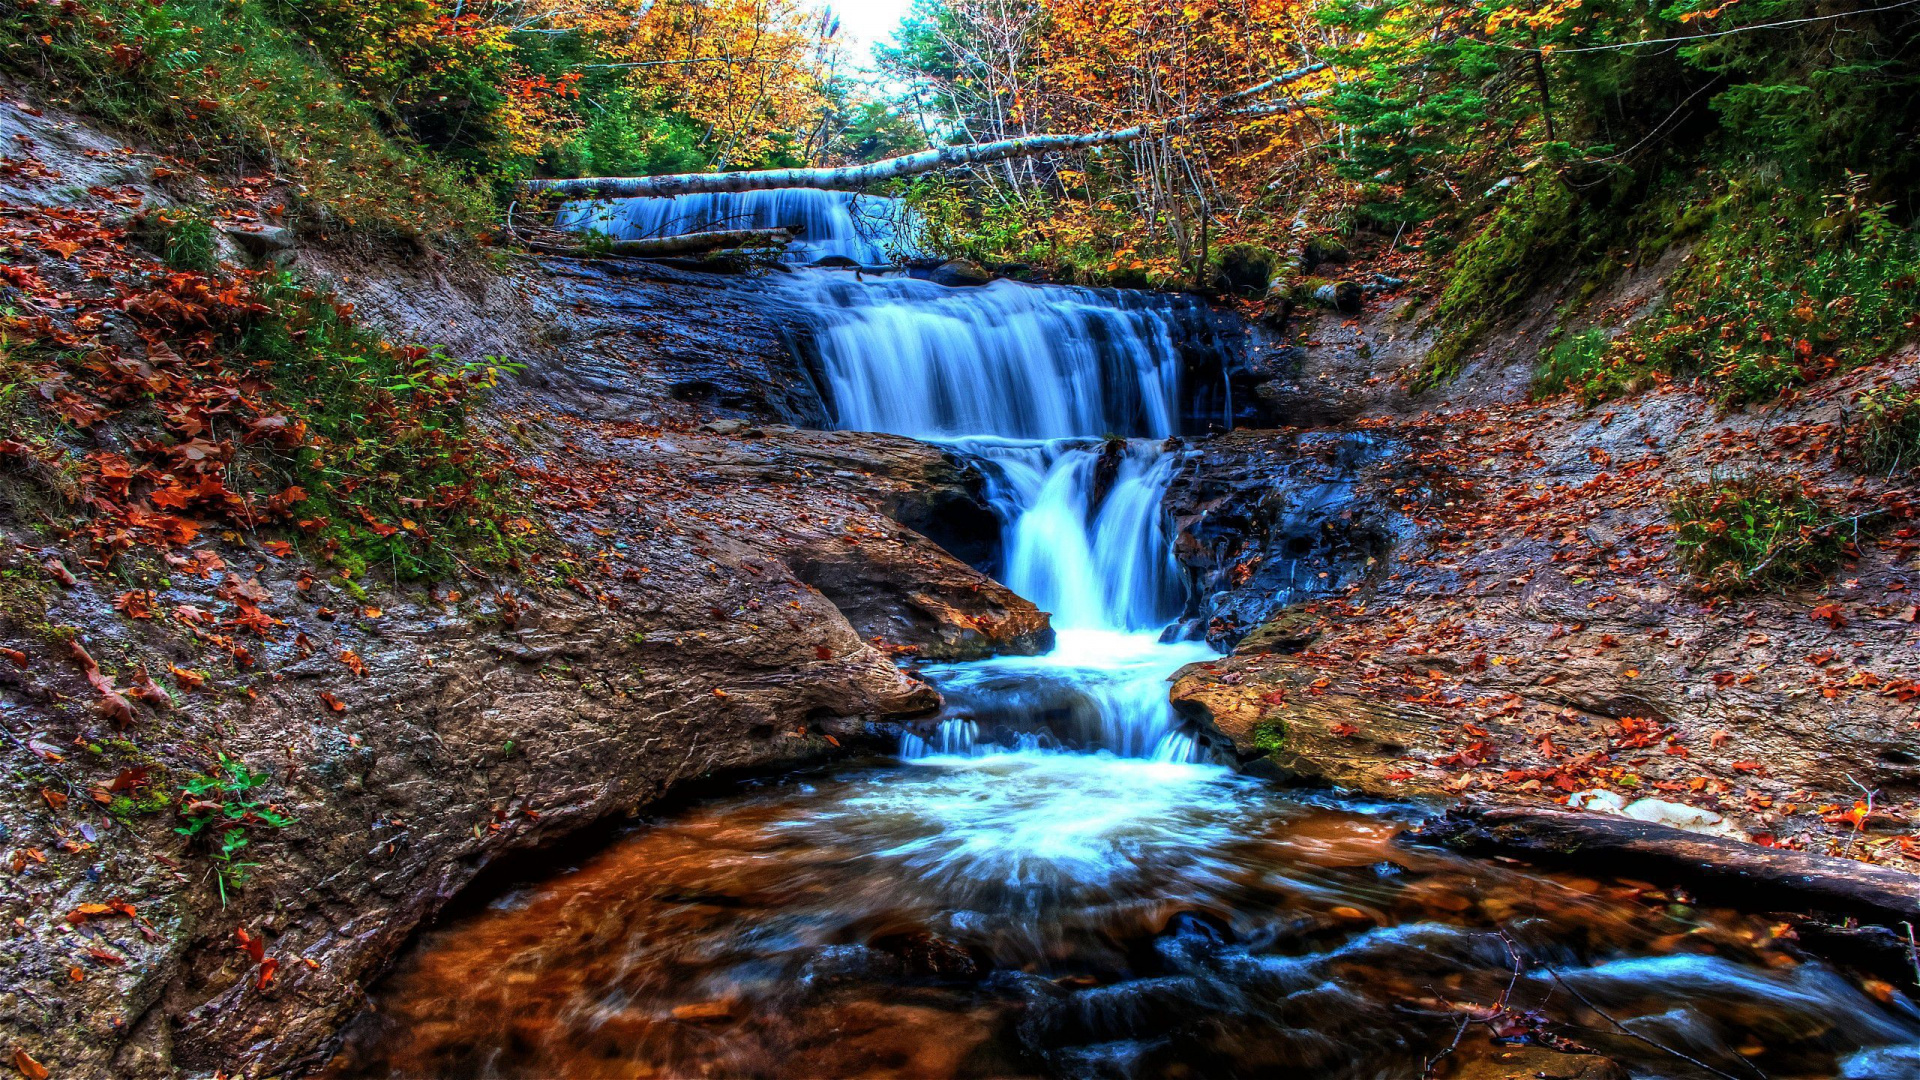 Water Falls in The Middle of The Forest. Wallpaper in 1920x1080 Resolution